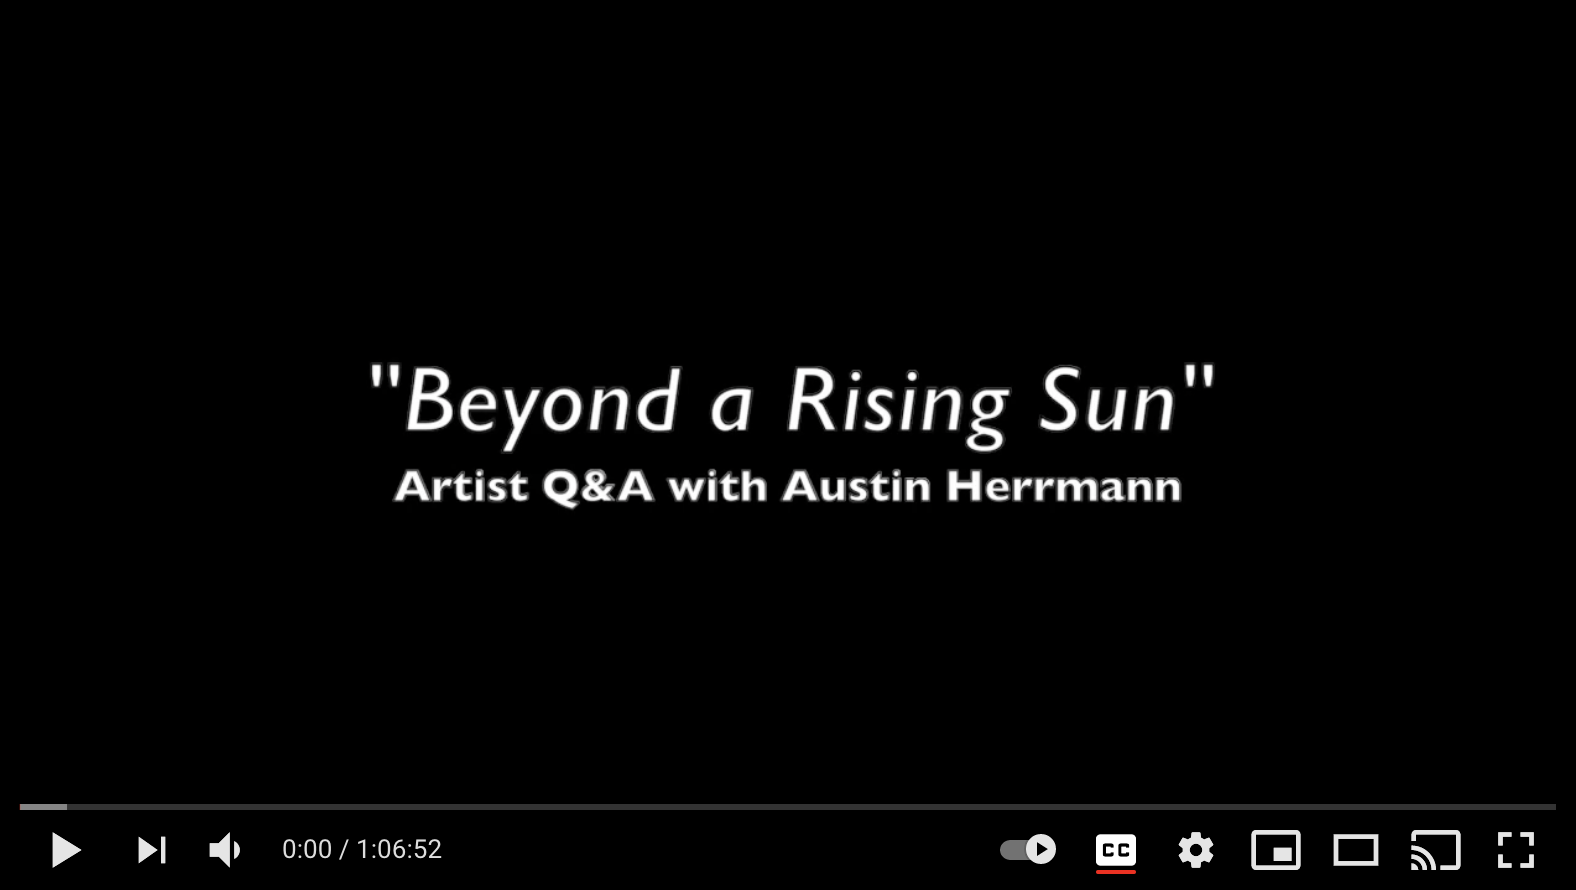 Screen shot of video title card for Q&A with Austin Herrmann